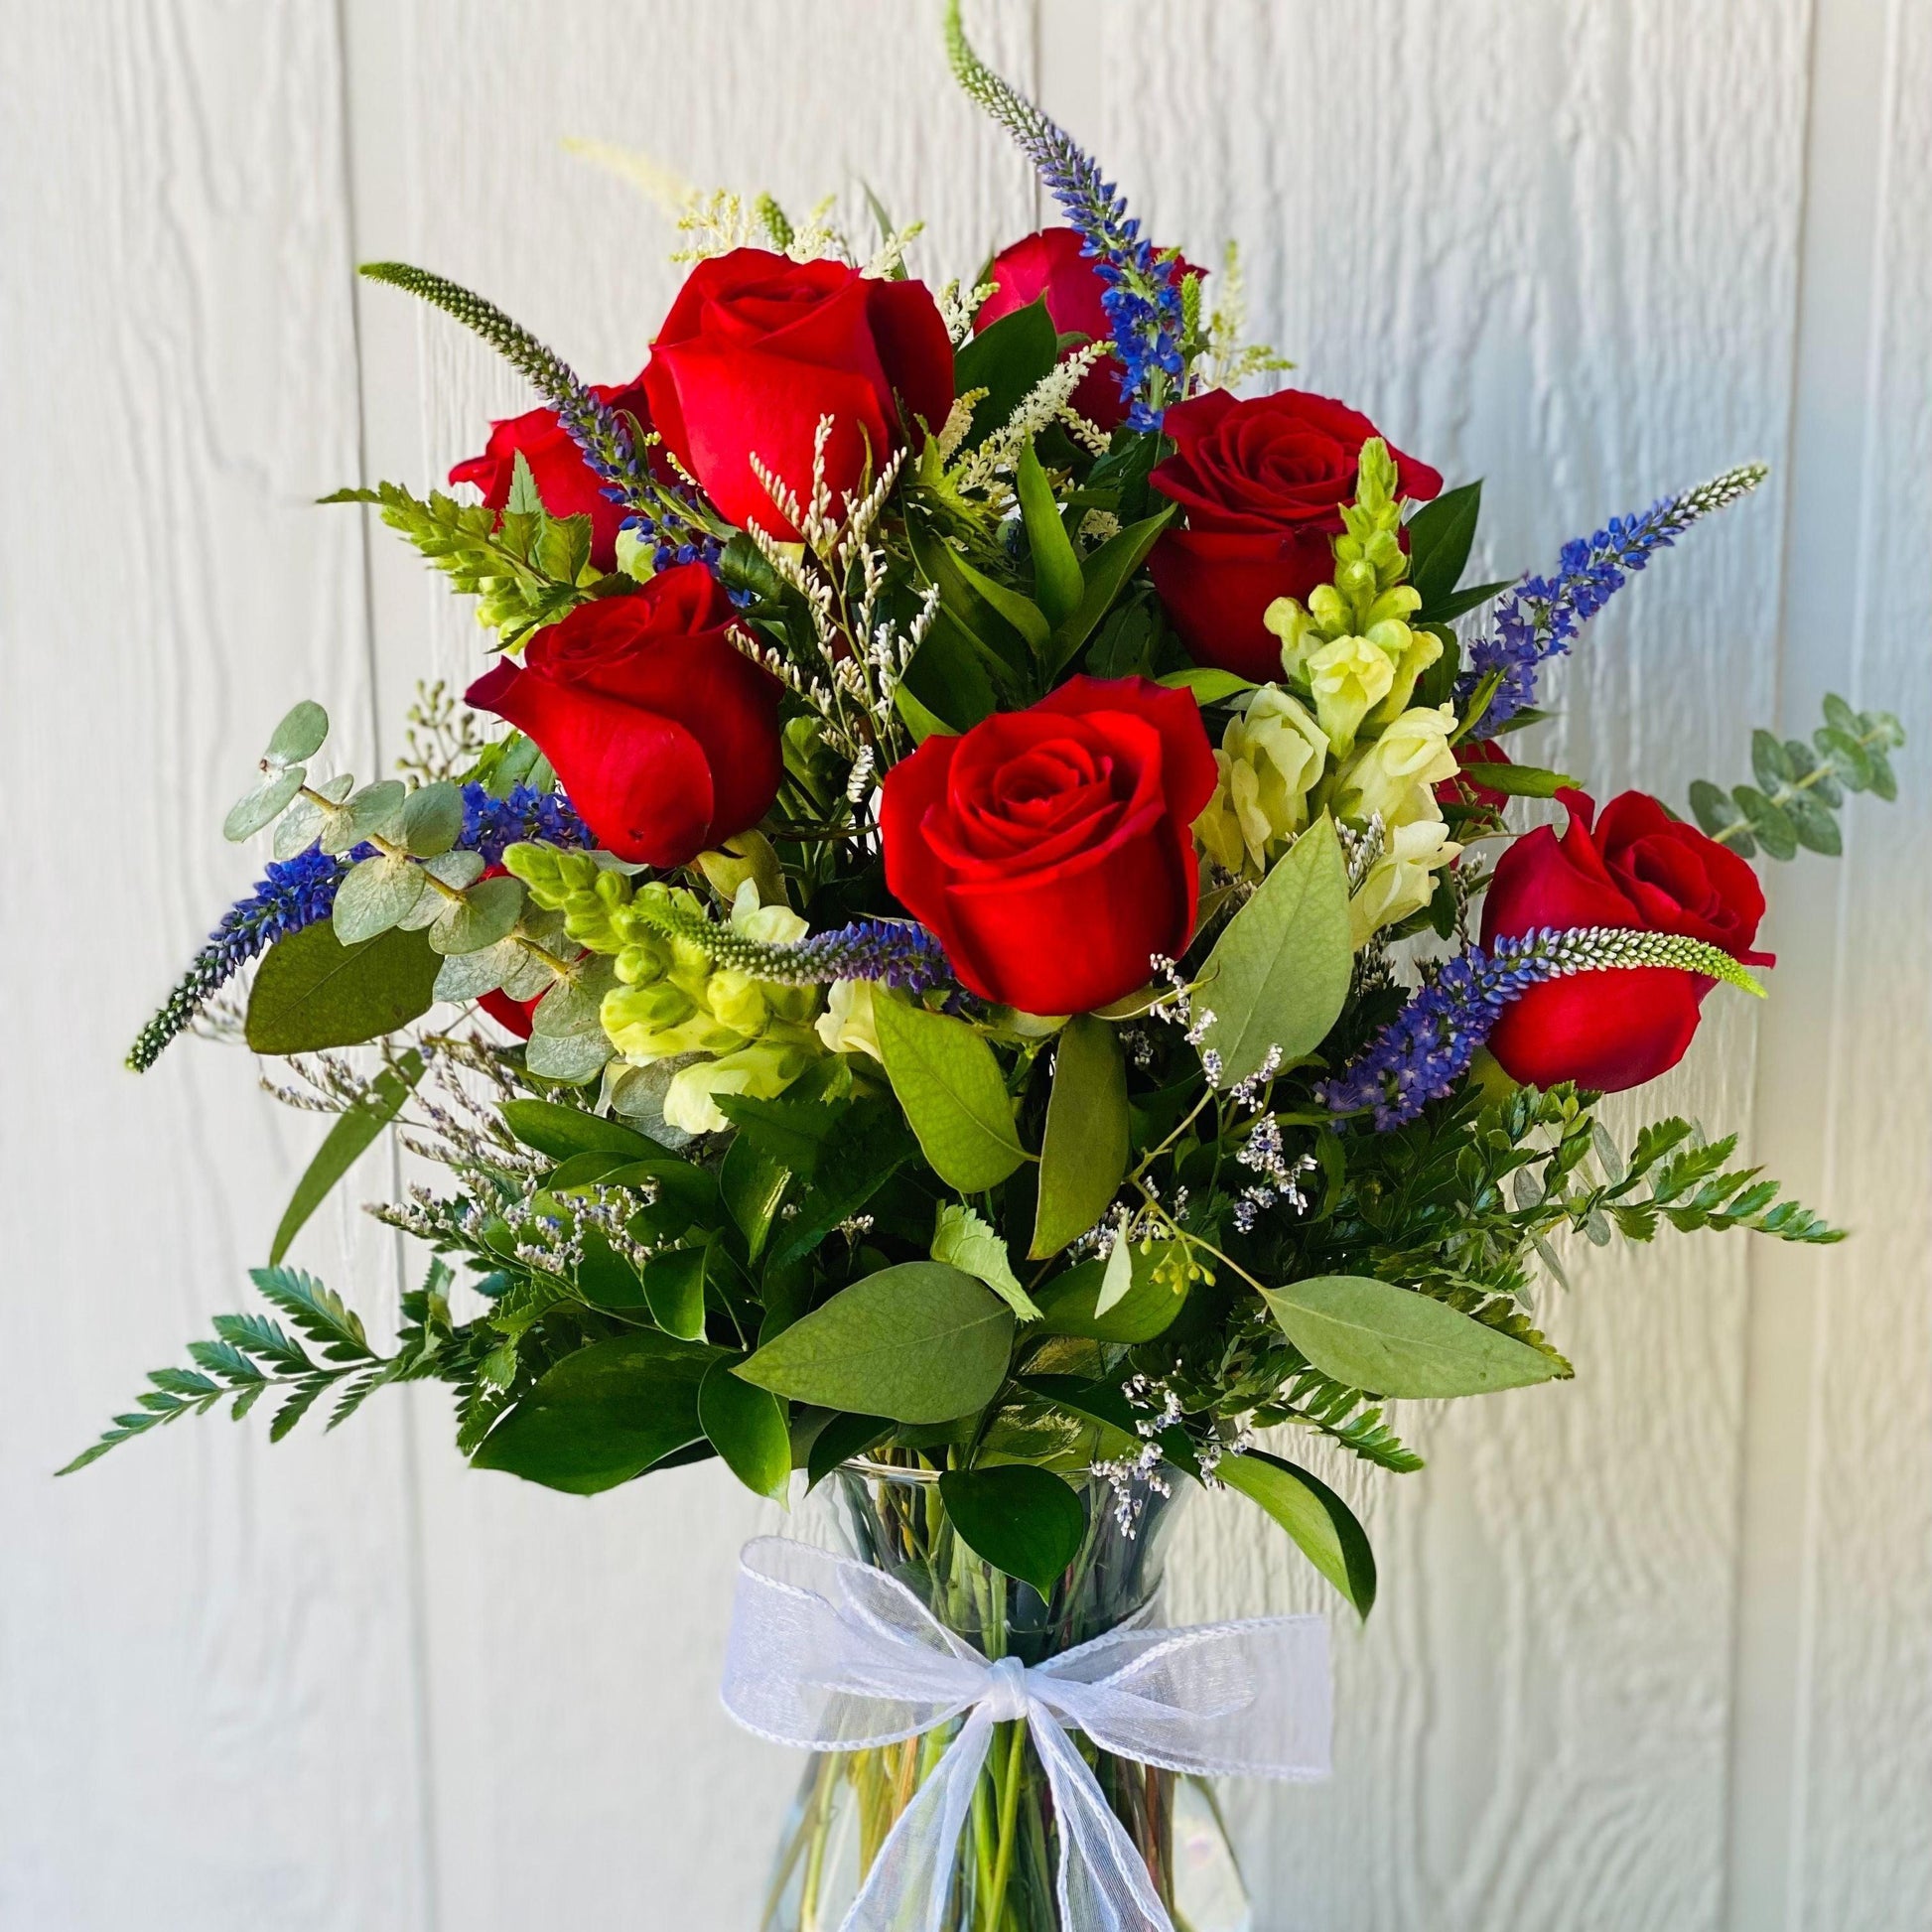 Sierra Flower Bouquet - Vacation Delivery Service - Flowers